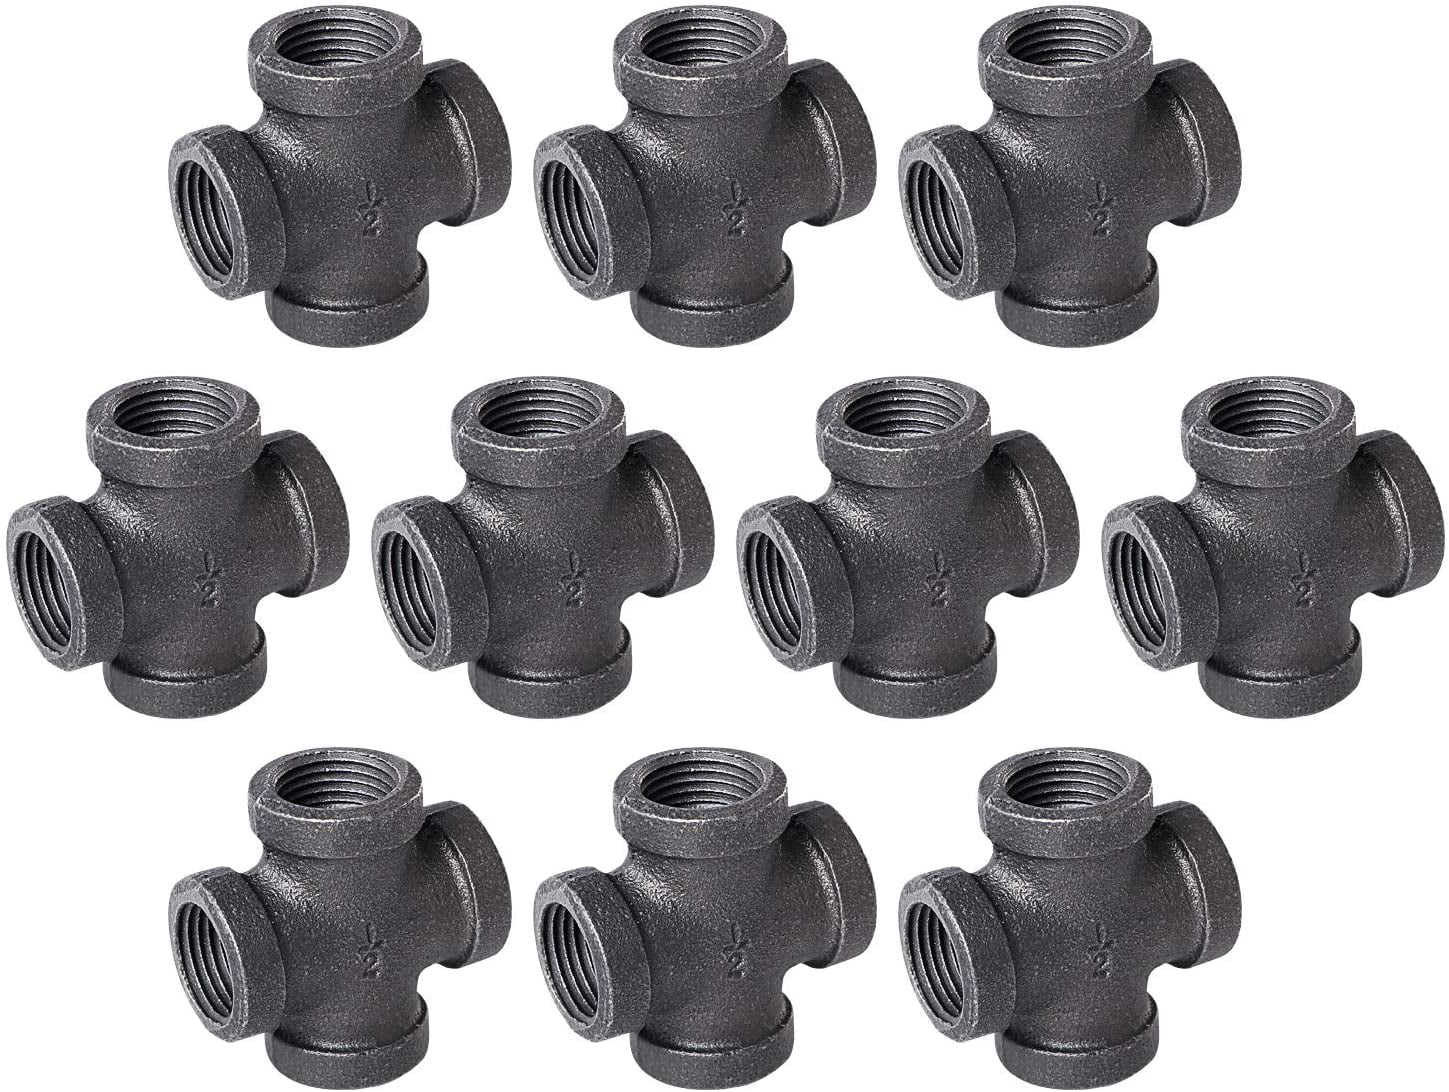 BLACK MALLEABLE IRON FITTING **SOLID PLUG** MALE STOP END BSP IN VARIOUS SIZES 